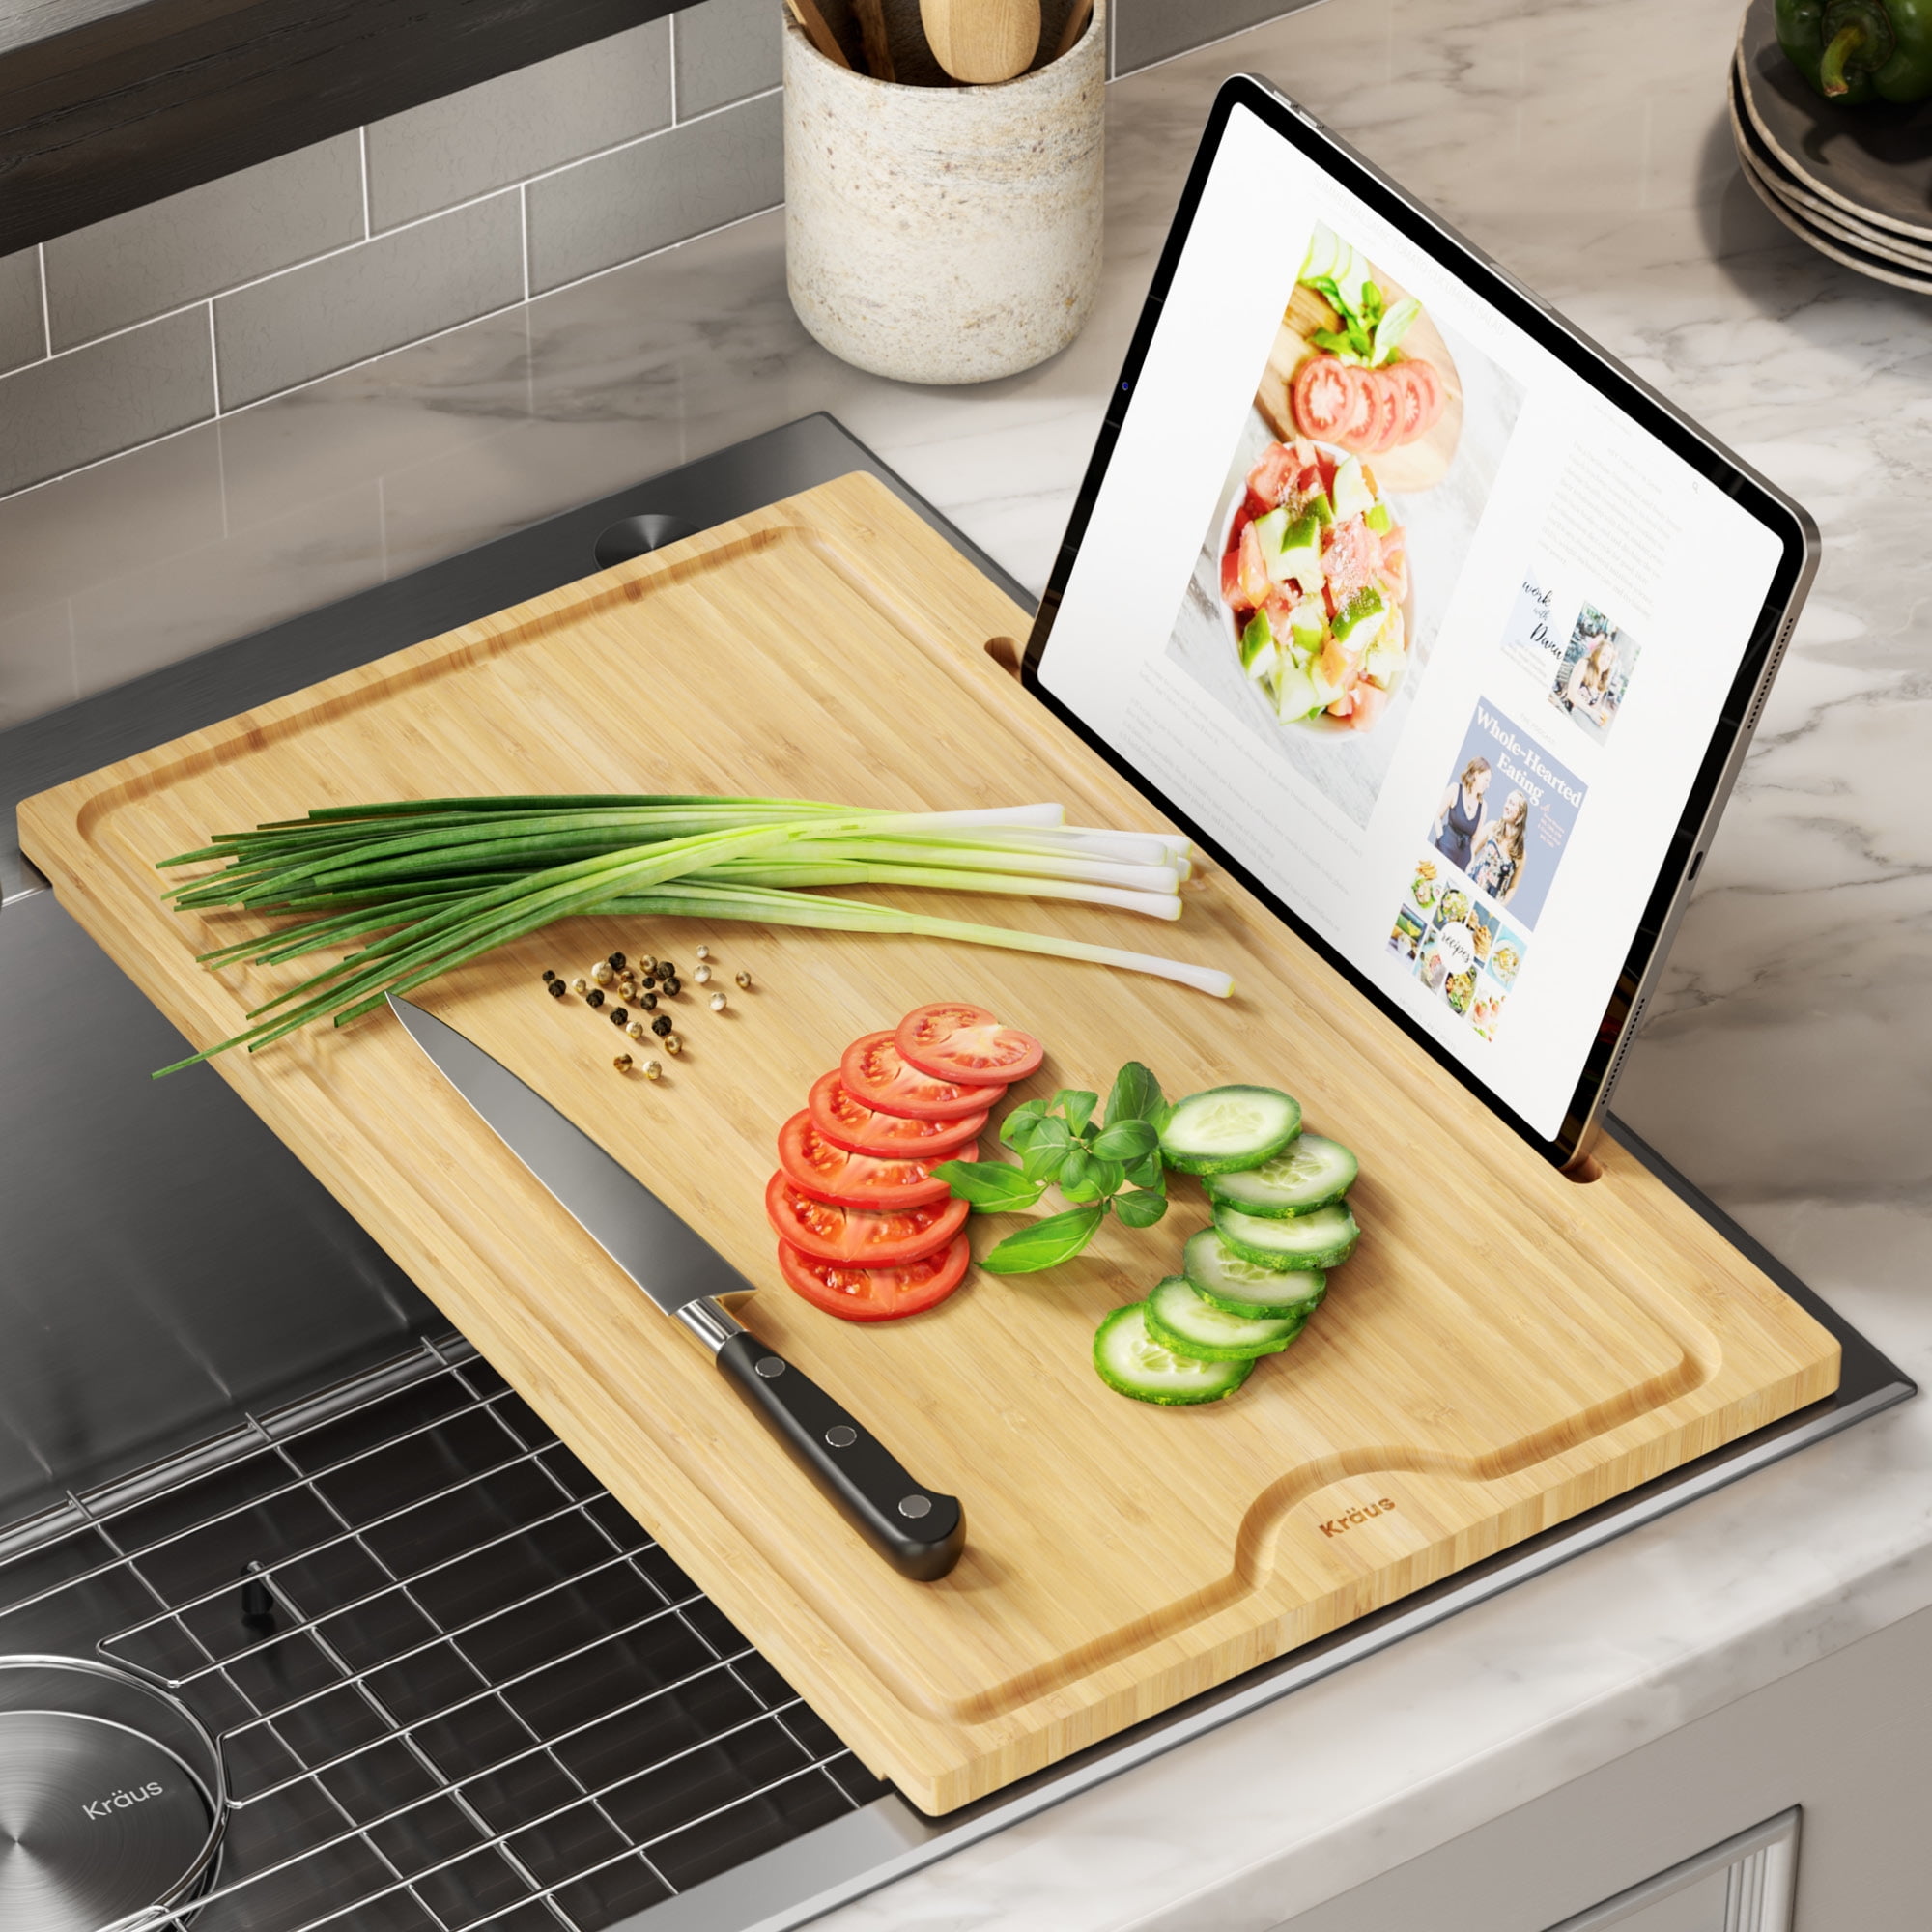 Wood Cutting Boards for Kitchen Sinks